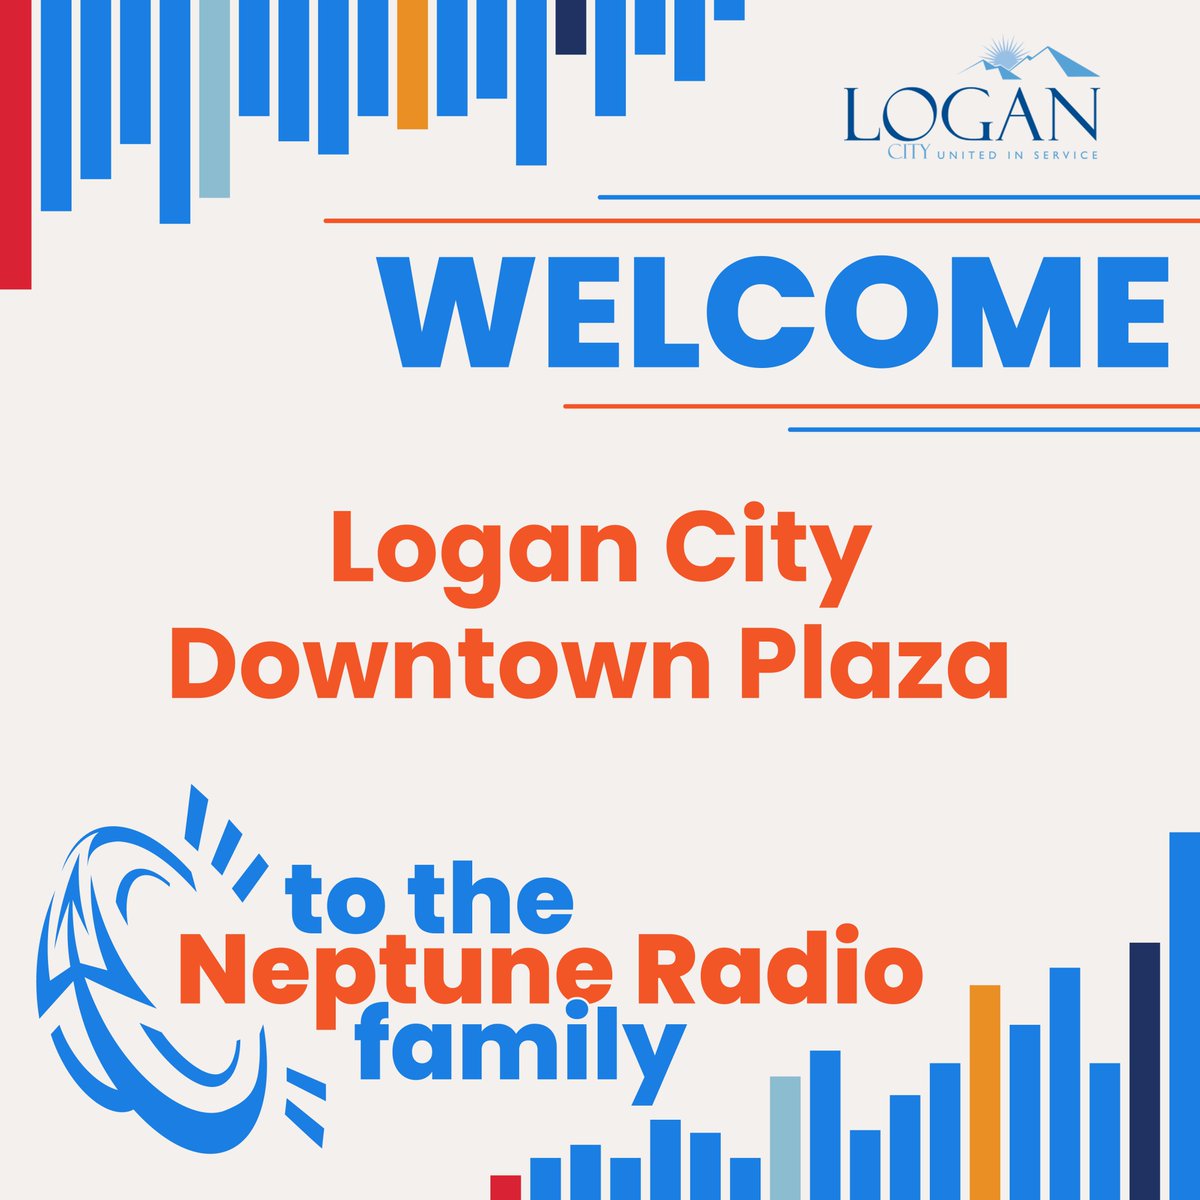 Welcome to the Neptune Radio family, Logan City Downtown Plaza in Utah! We’re excited to enhance the experience for your visitors with 100% lyric-safe music and a professional radio sound they’ll love!